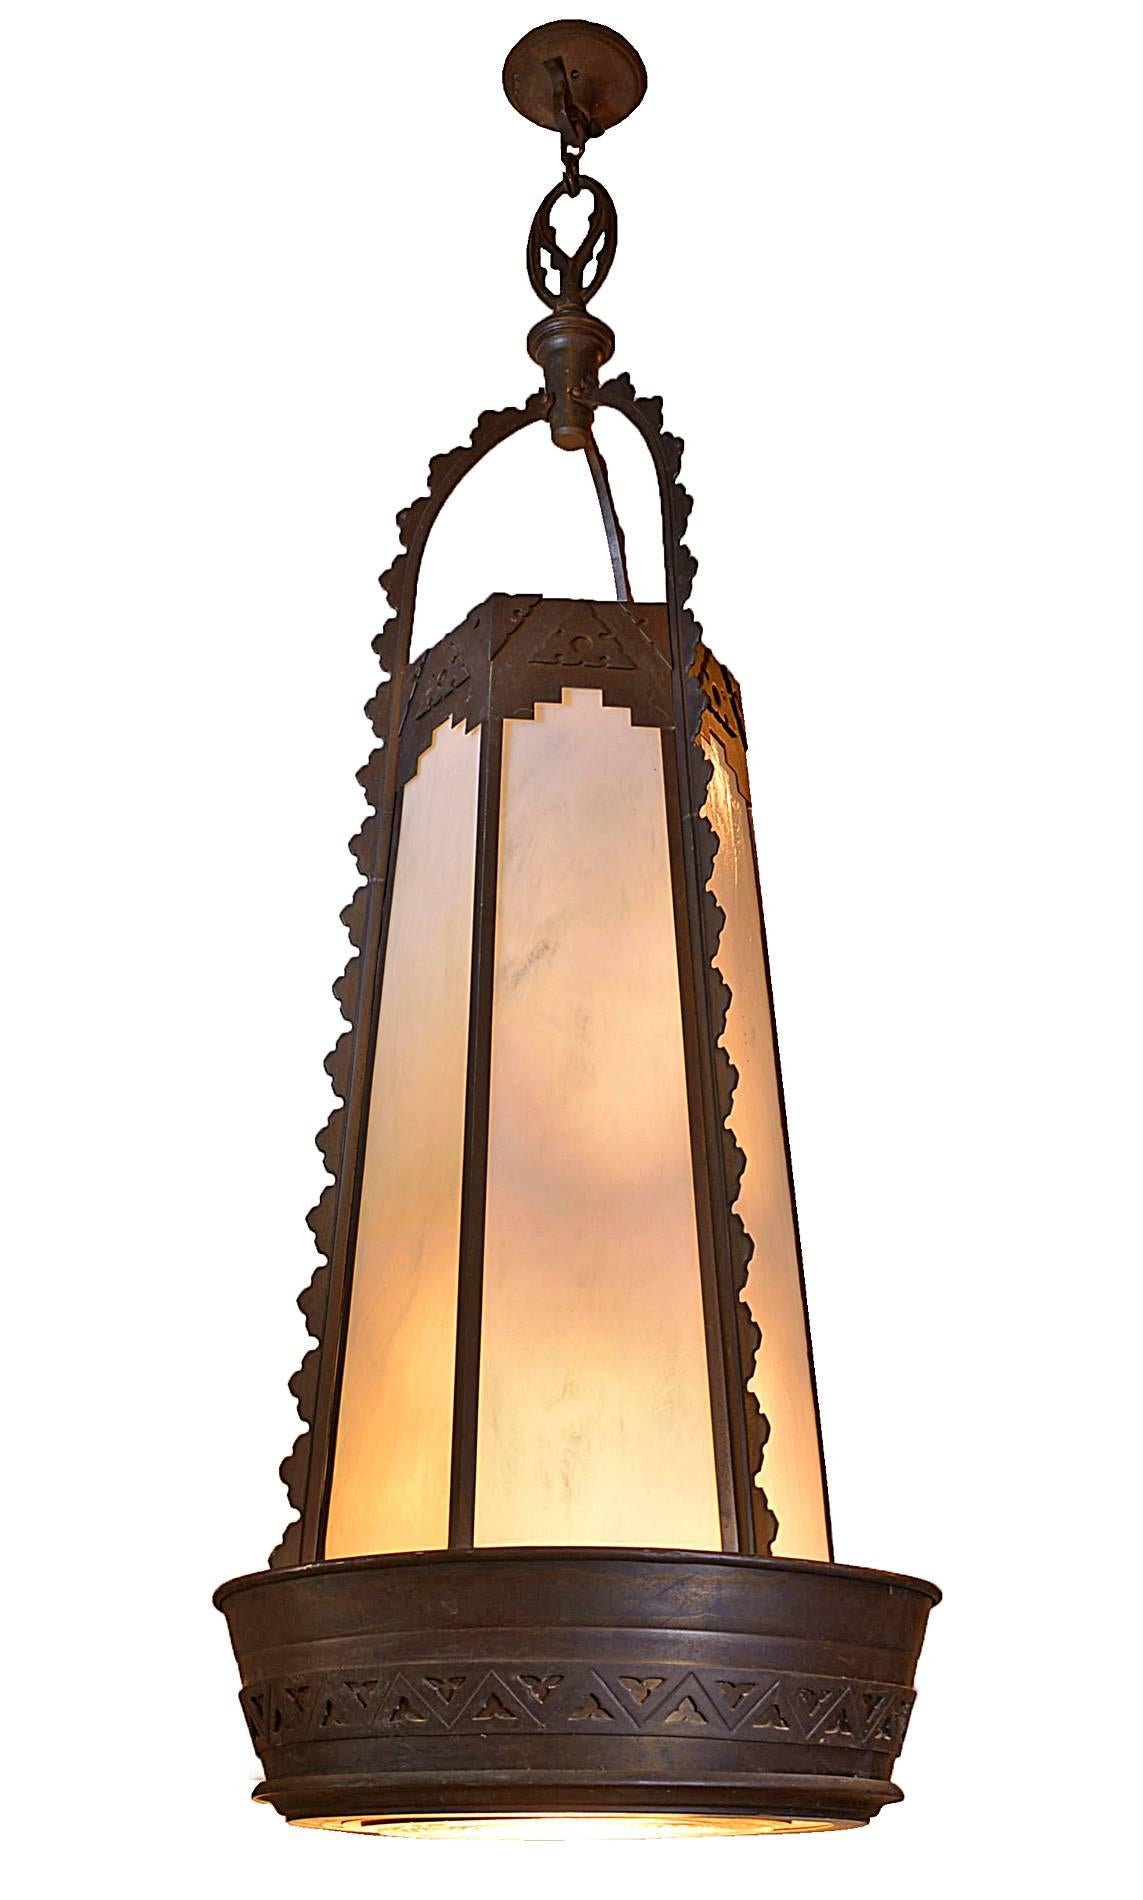 Made circa 1920 in the Art Deco style, this unusual, wonderful cast bronze pendant has stood the test of time. Heavy cast bronze with a rich patina is fashioned into an unexpected shape with geometric lines and a hint of Gothic influence. A